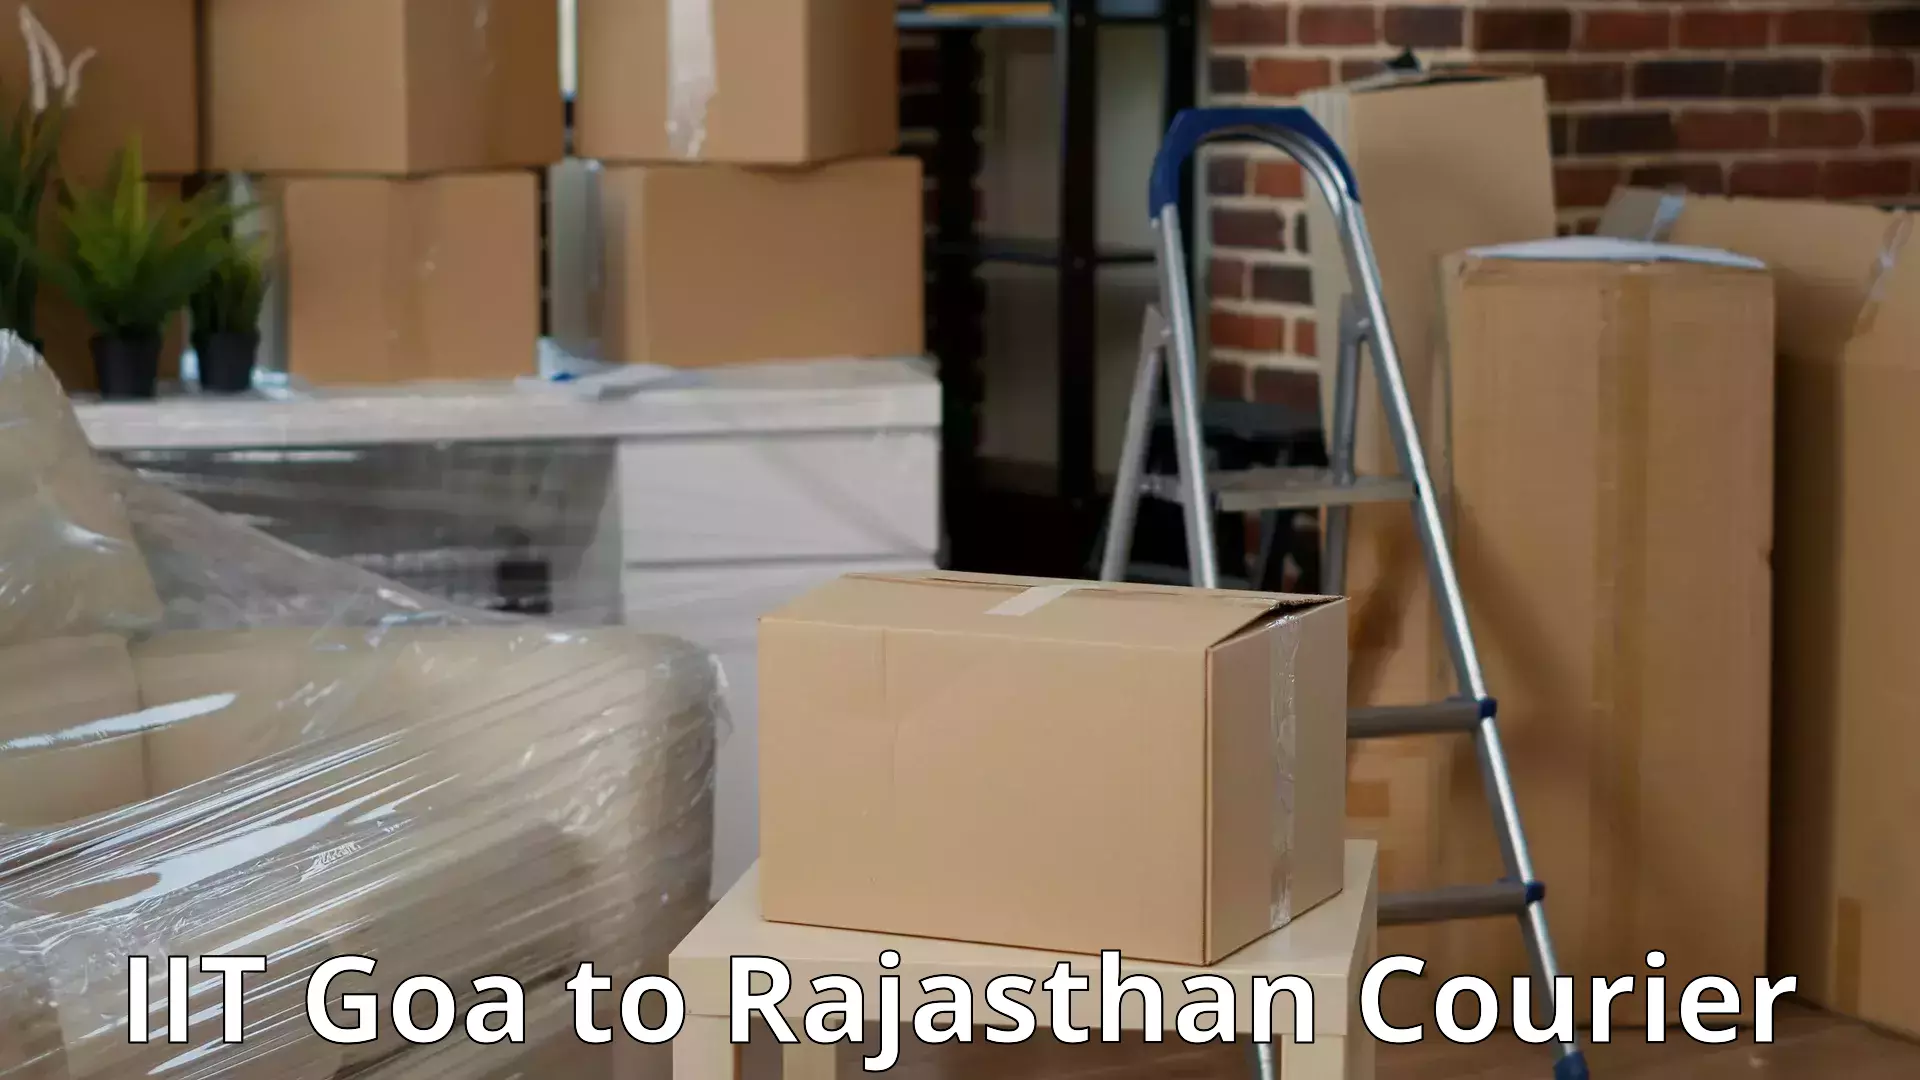 Quality relocation assistance IIT Goa to Kota